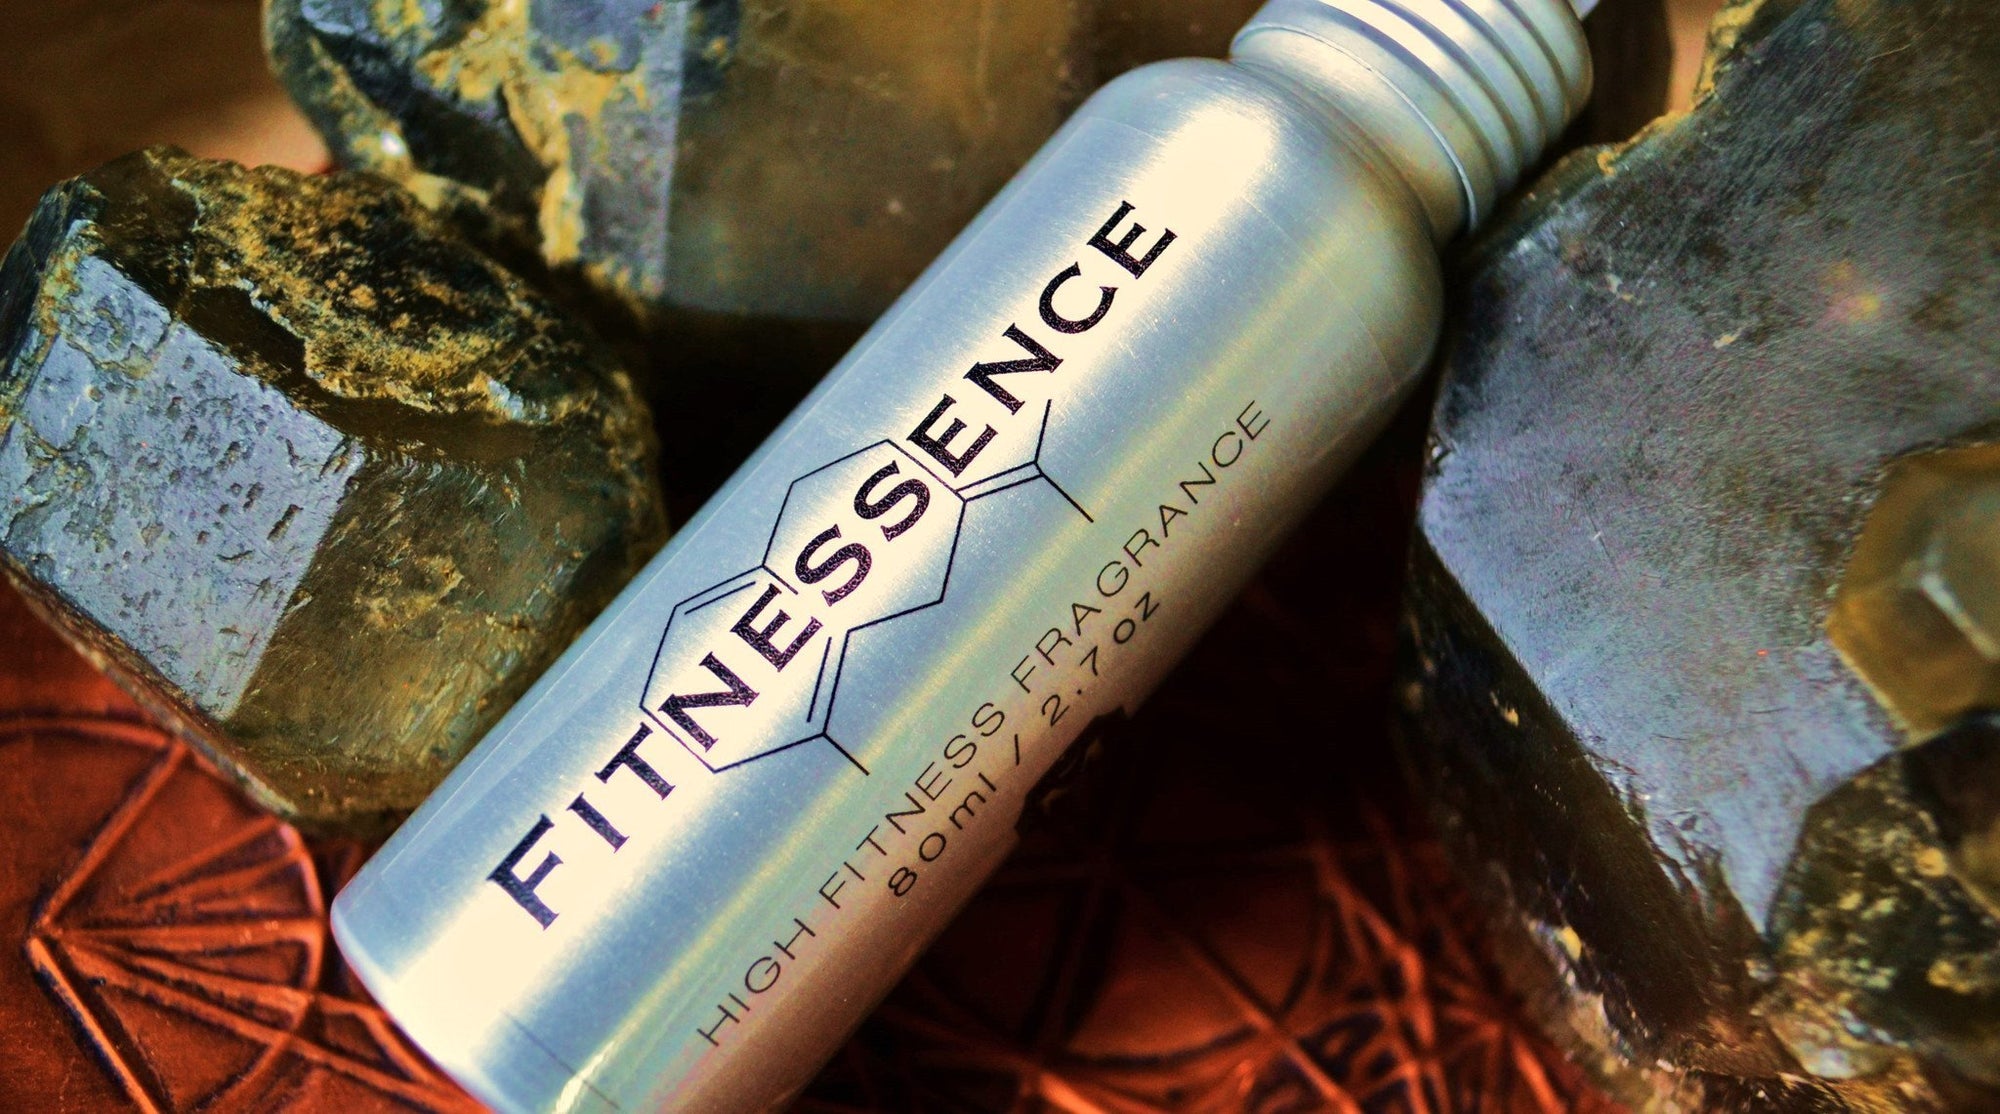 “FITNESSENCE” The first PREWORKOUT fitness optimizing fragrance!